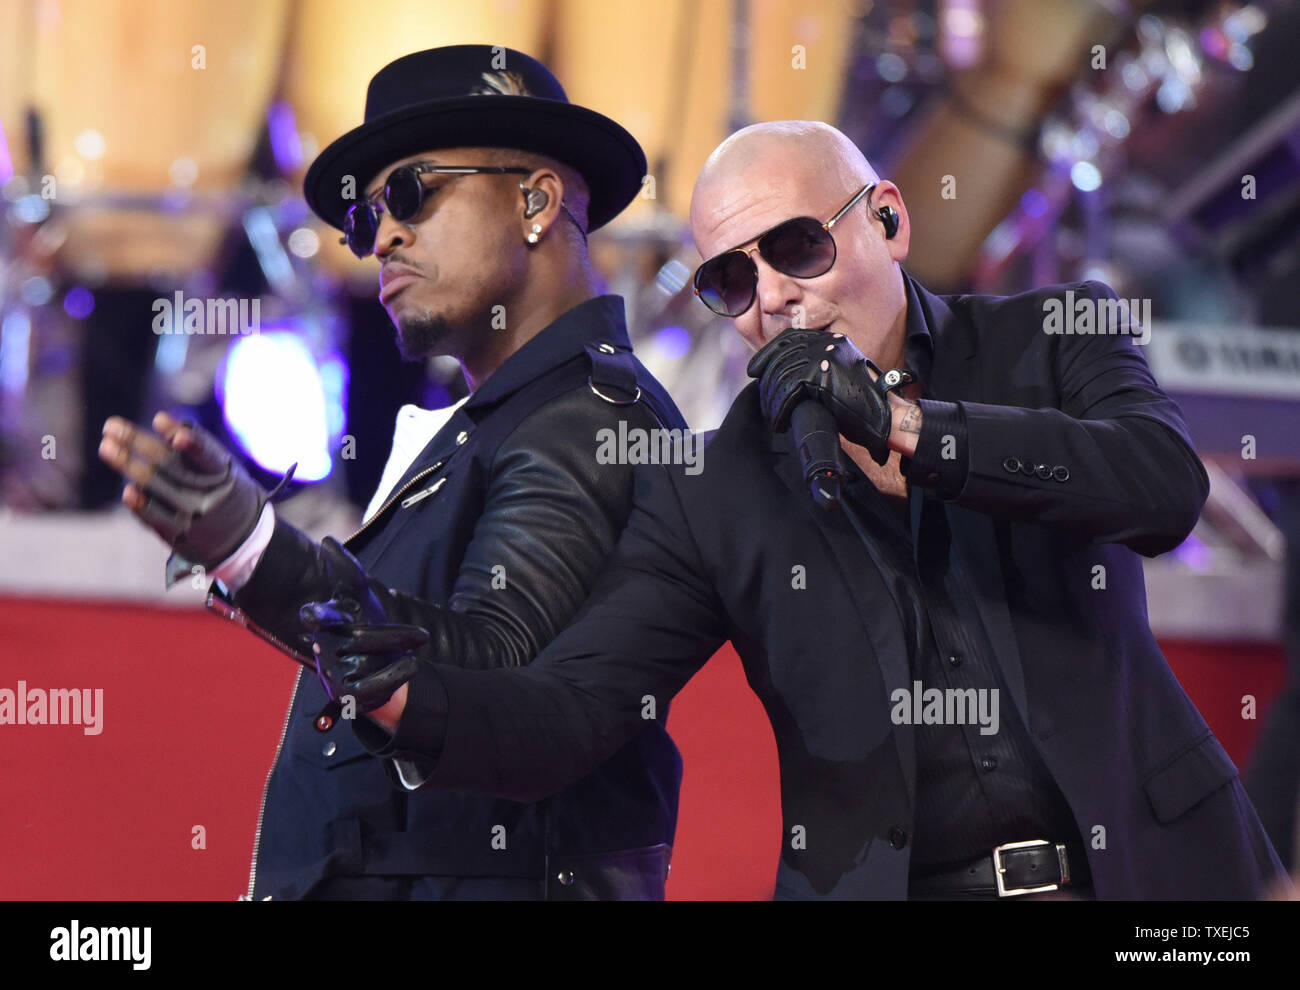 Rappers Ne-Yo and Pittbull perform during halftime of the Dallas Cowboys and Oakland Raiders game at AT&T Stadium in Arlington, Texas on November 27, 2014. For the past 17 years the Dallas Cowboys Thanksgiving Day halftime show has officially launched the Red Kettle Christmas Campaign on a national stage. Since the partnership began in 1997, the annual Red Kettle campaign has raised more than $1.75 billion, which has helped the Army to serve 30 million people each year.   UPI/Ian Halperin Stock Photo